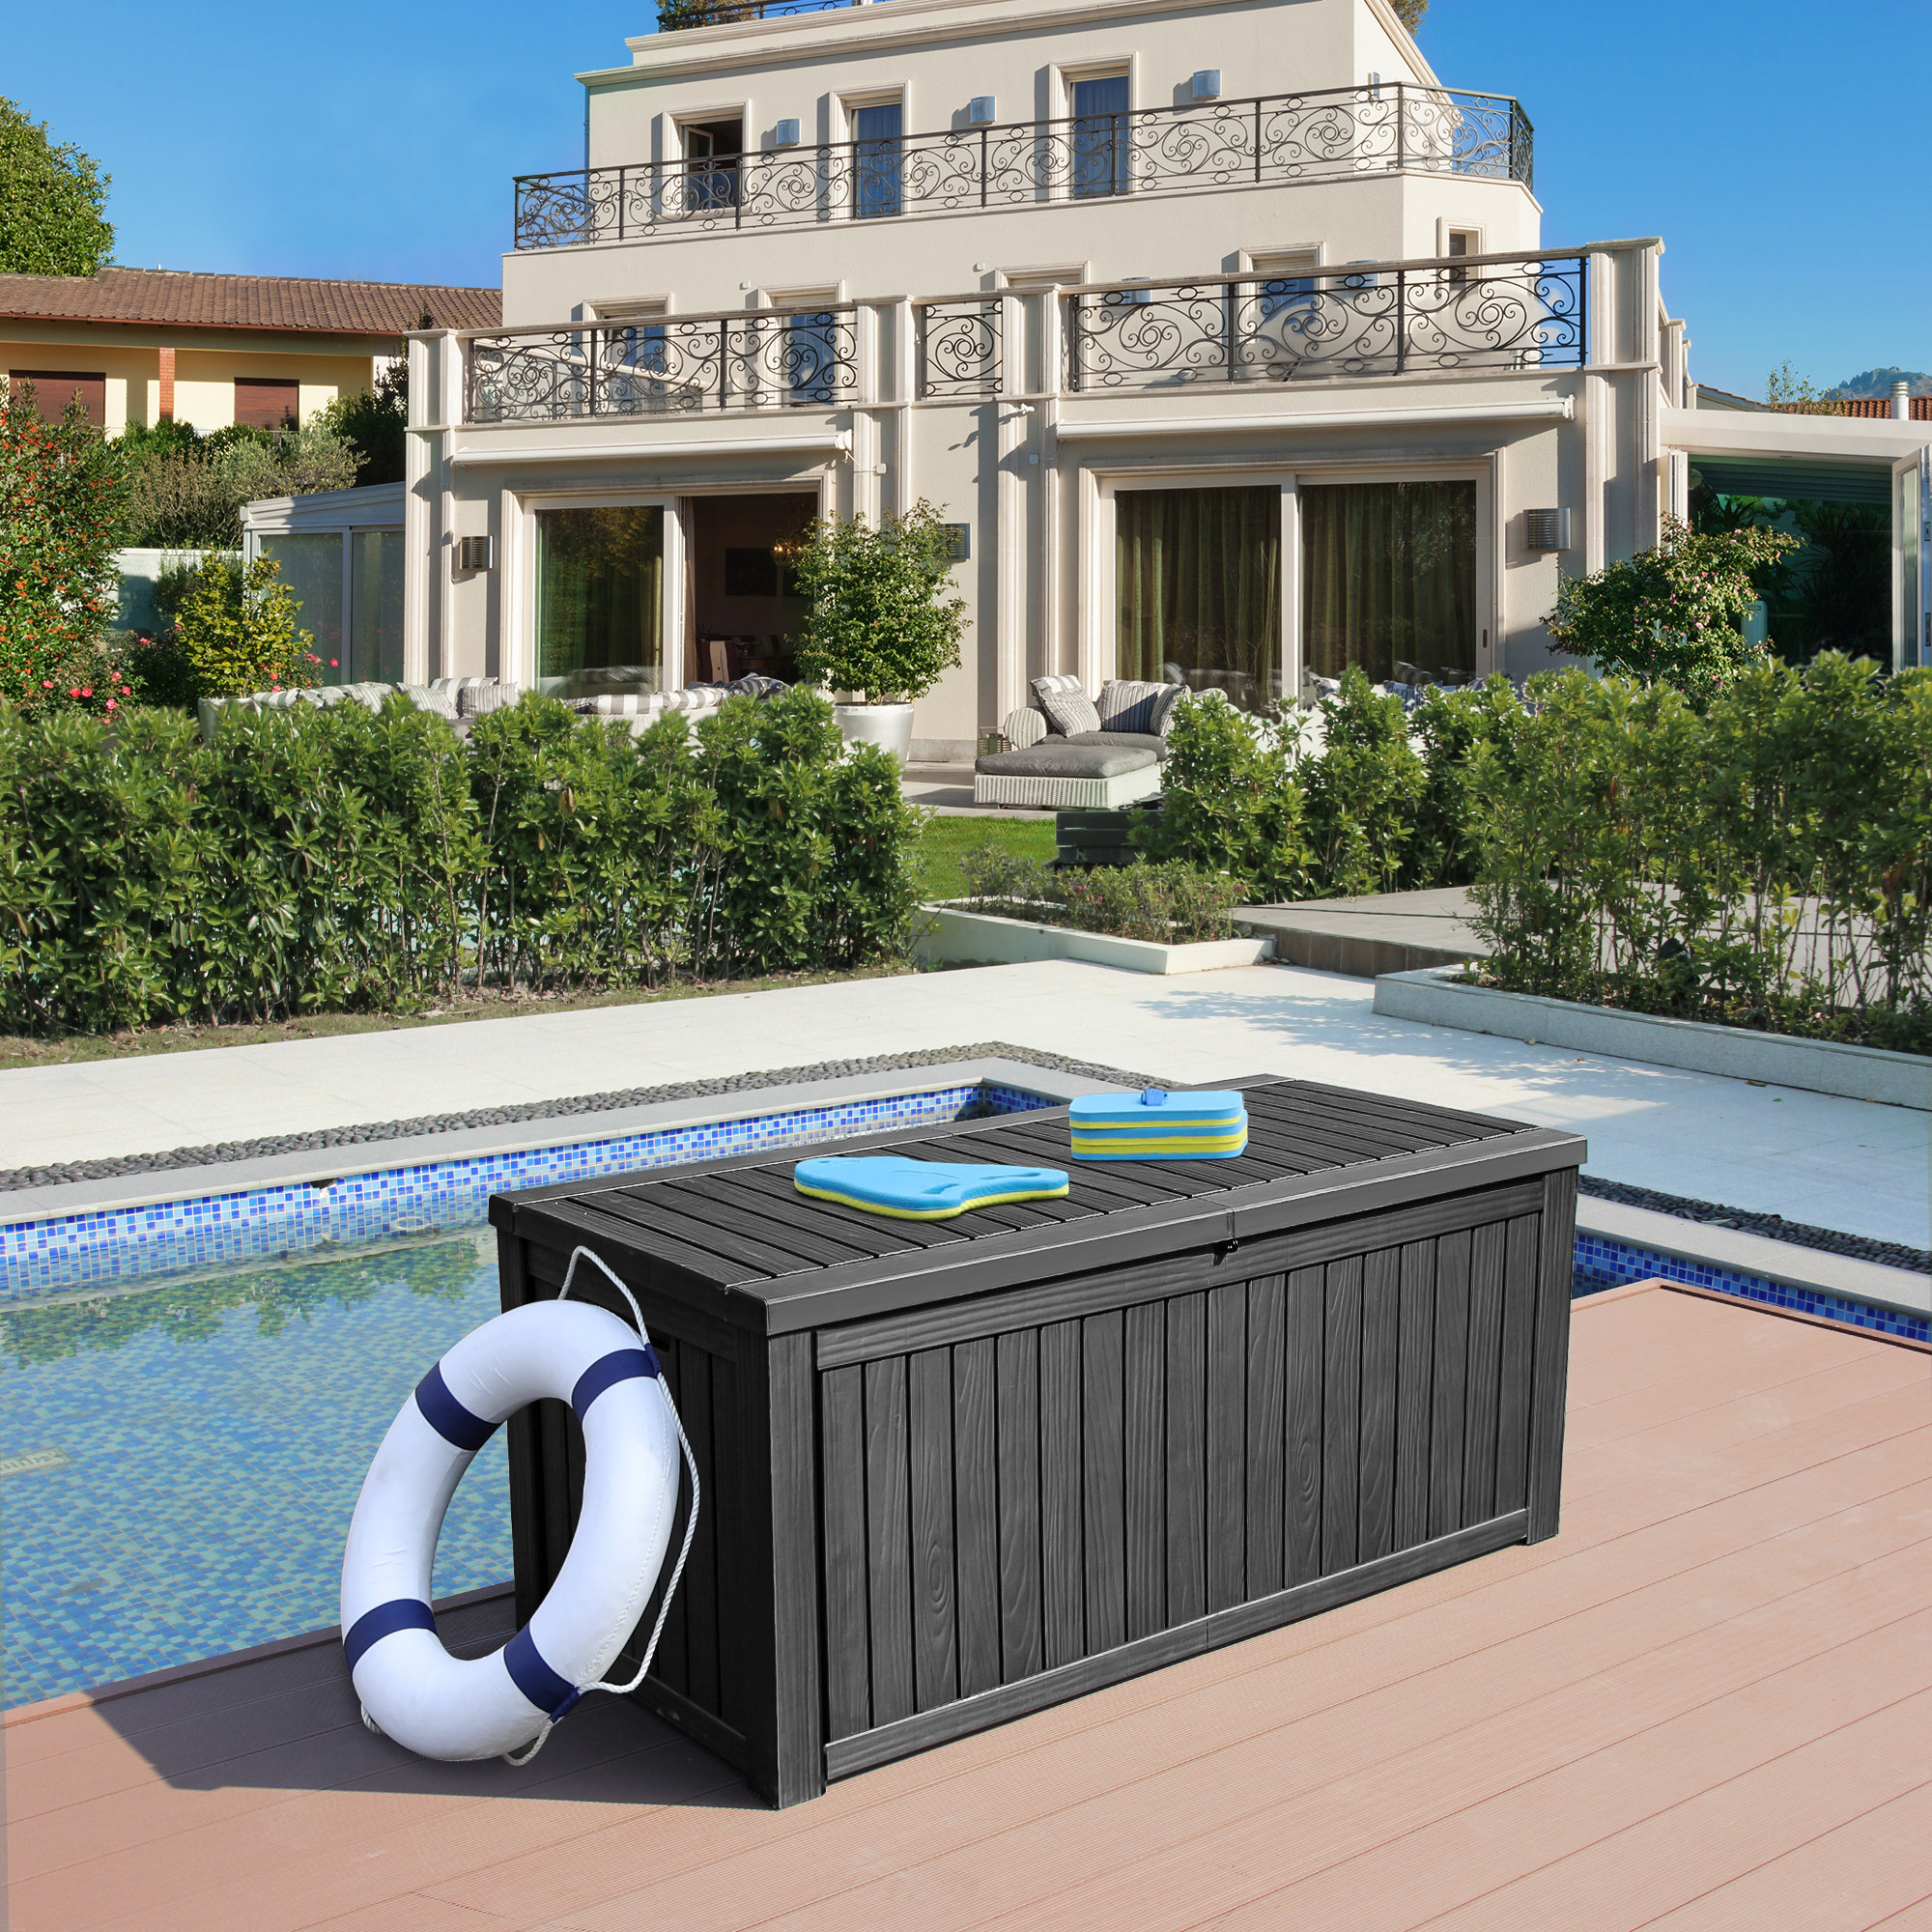 Rubbermaid Outdoor Deck Box, Extra Large, Weather Resistant, Gray for Lawn,  Garden, Pool, Tool Storage, Home Organization